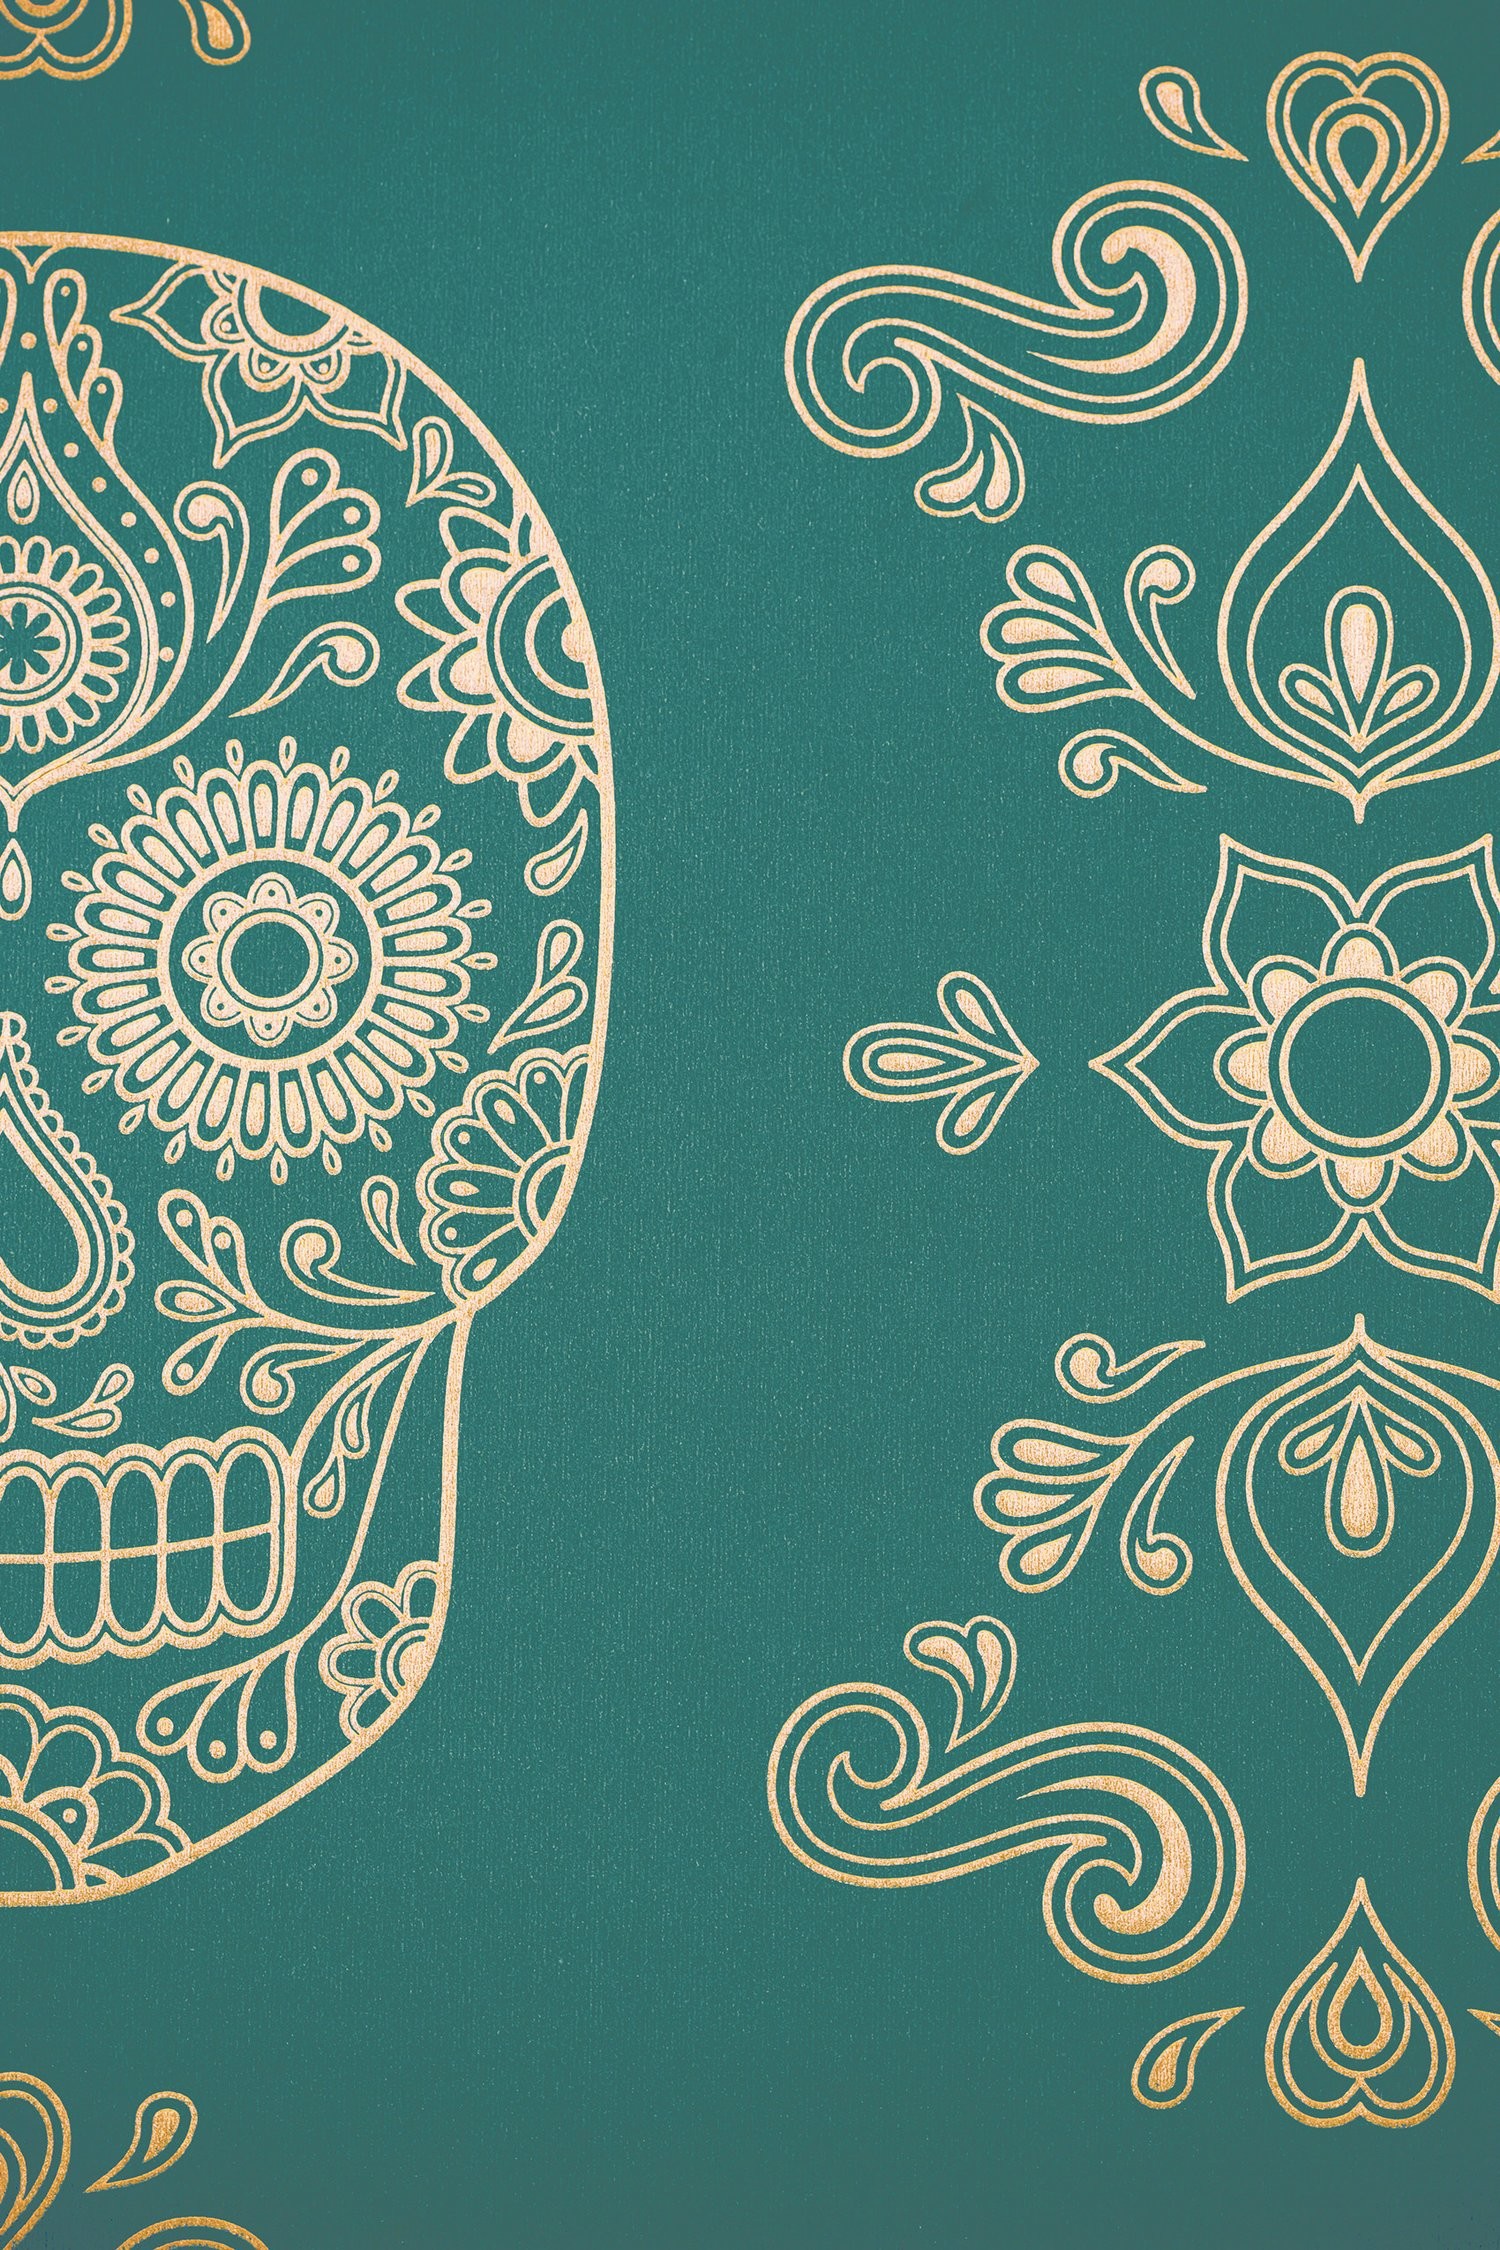 day of the dead iPhone Wallpapers Free Download